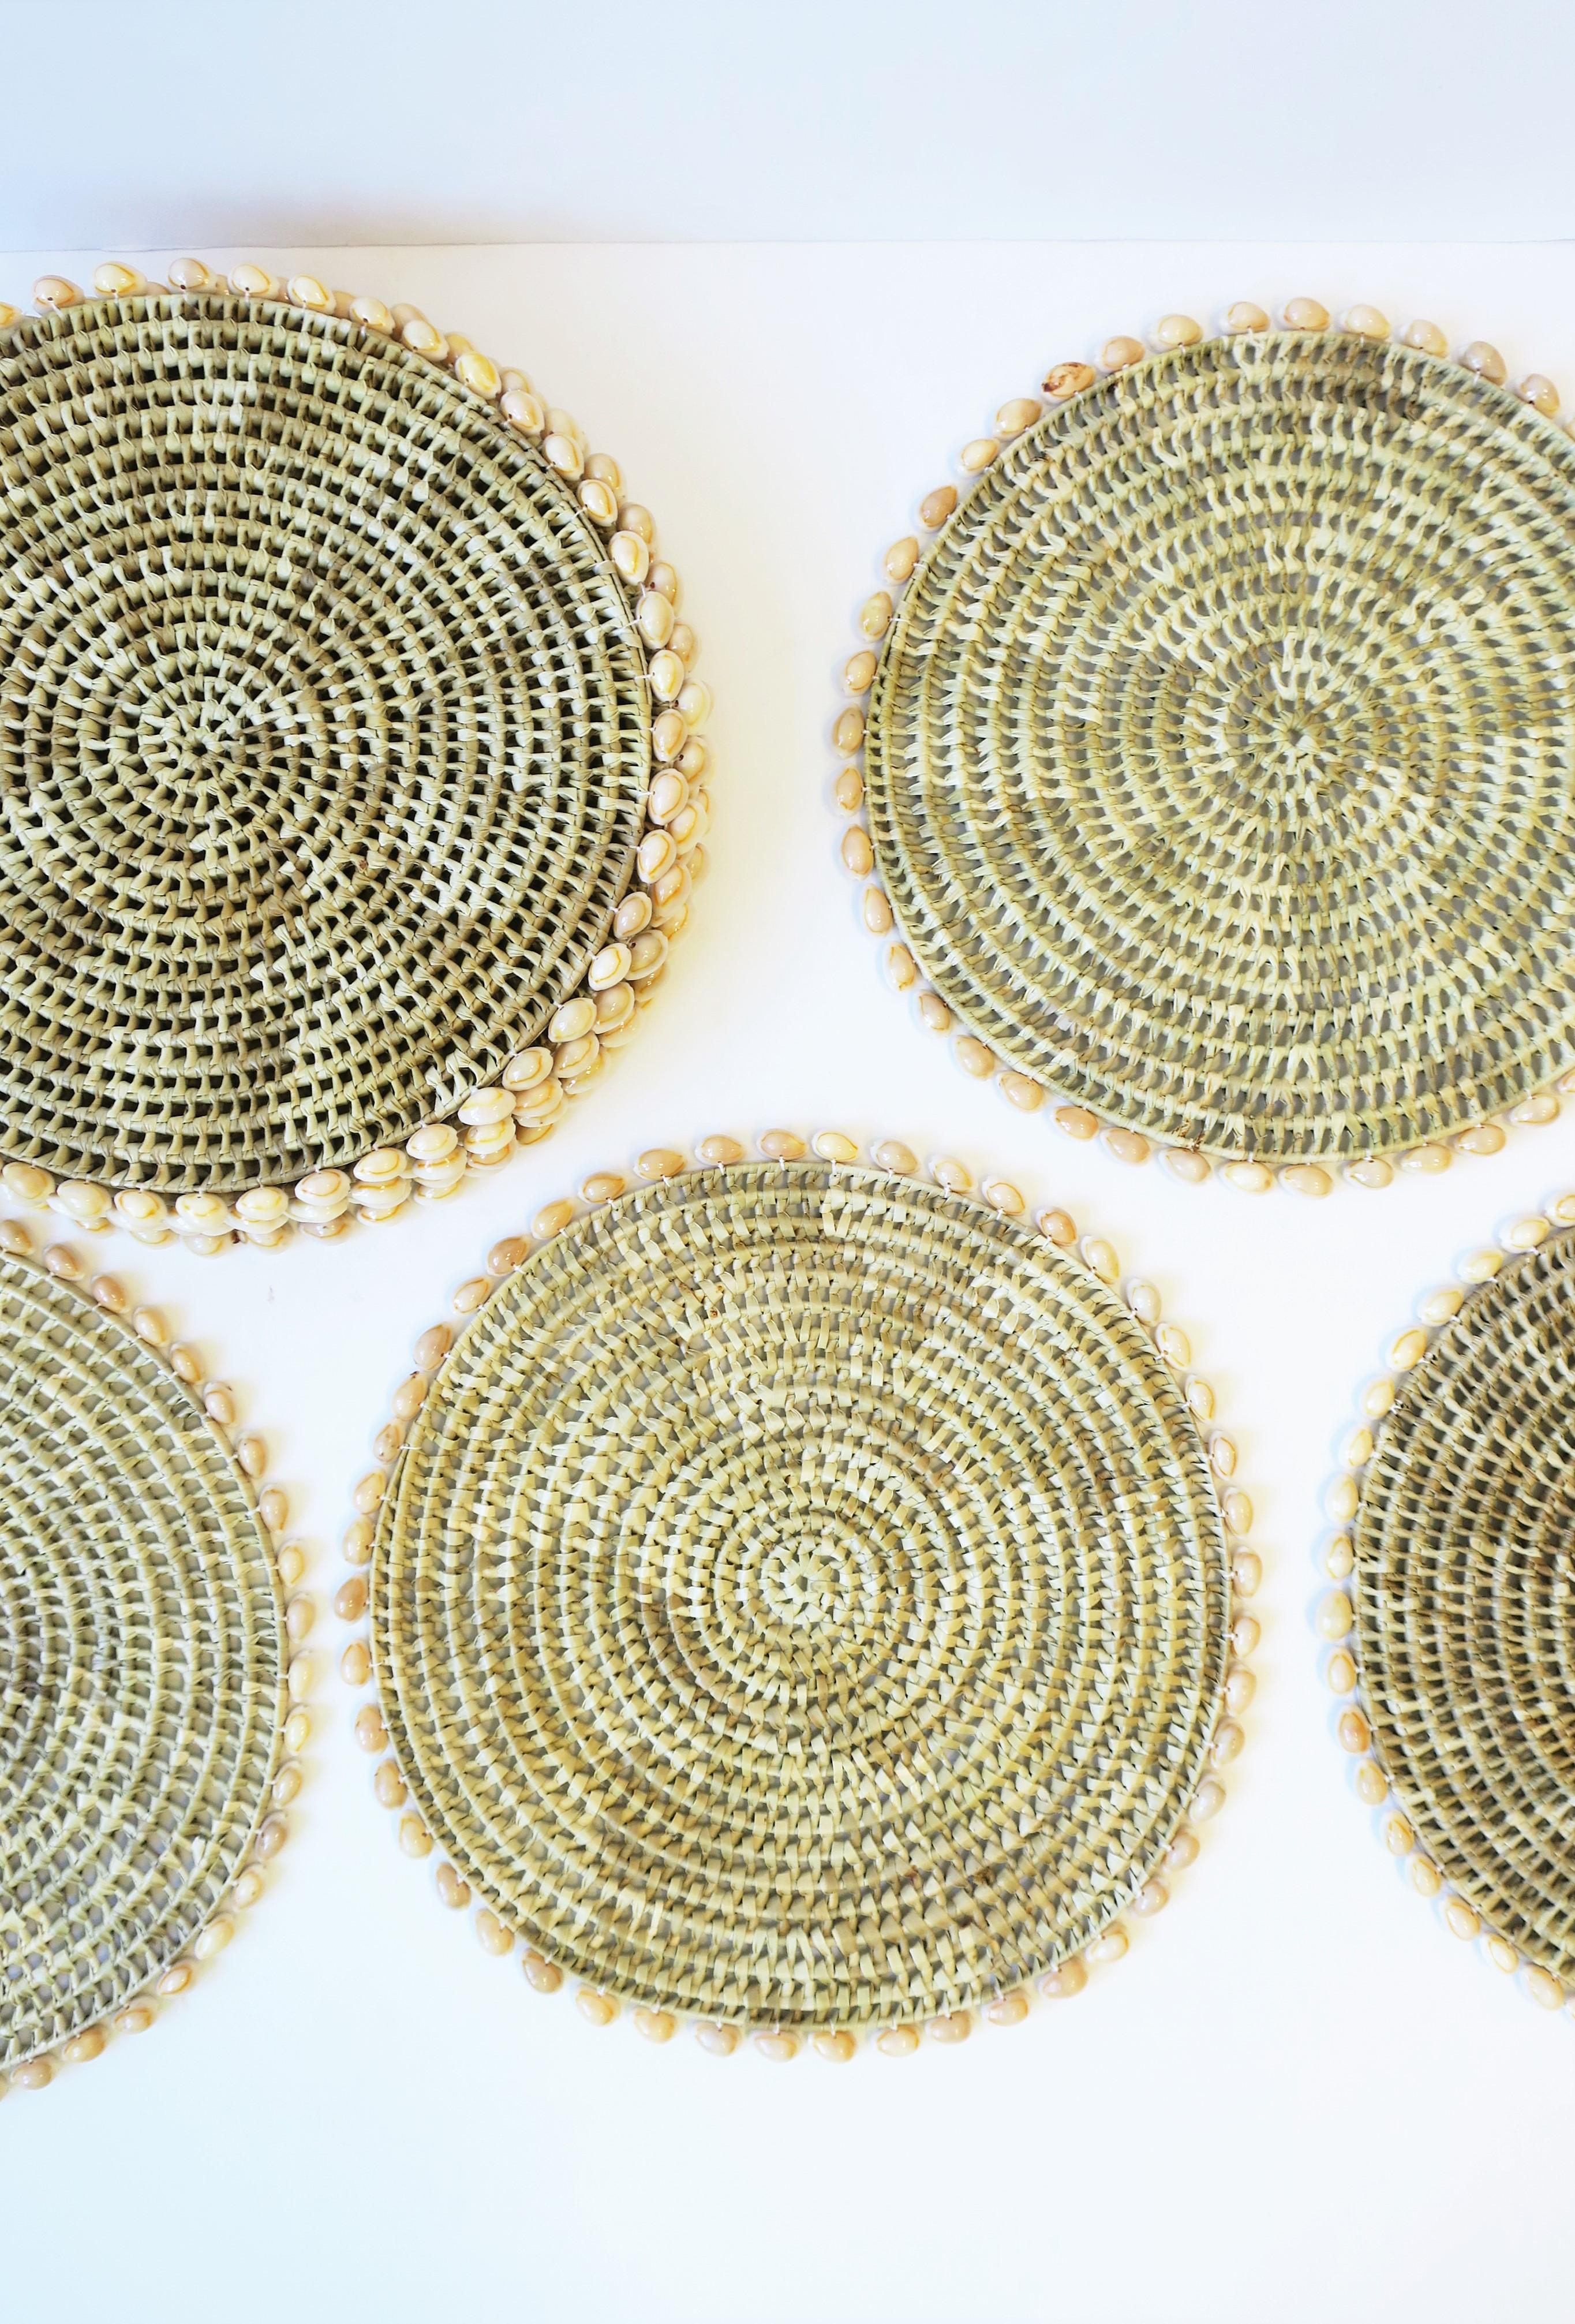 Seashell and Wicker Placemats or Dinner Plate Chargers, Set of 12 6